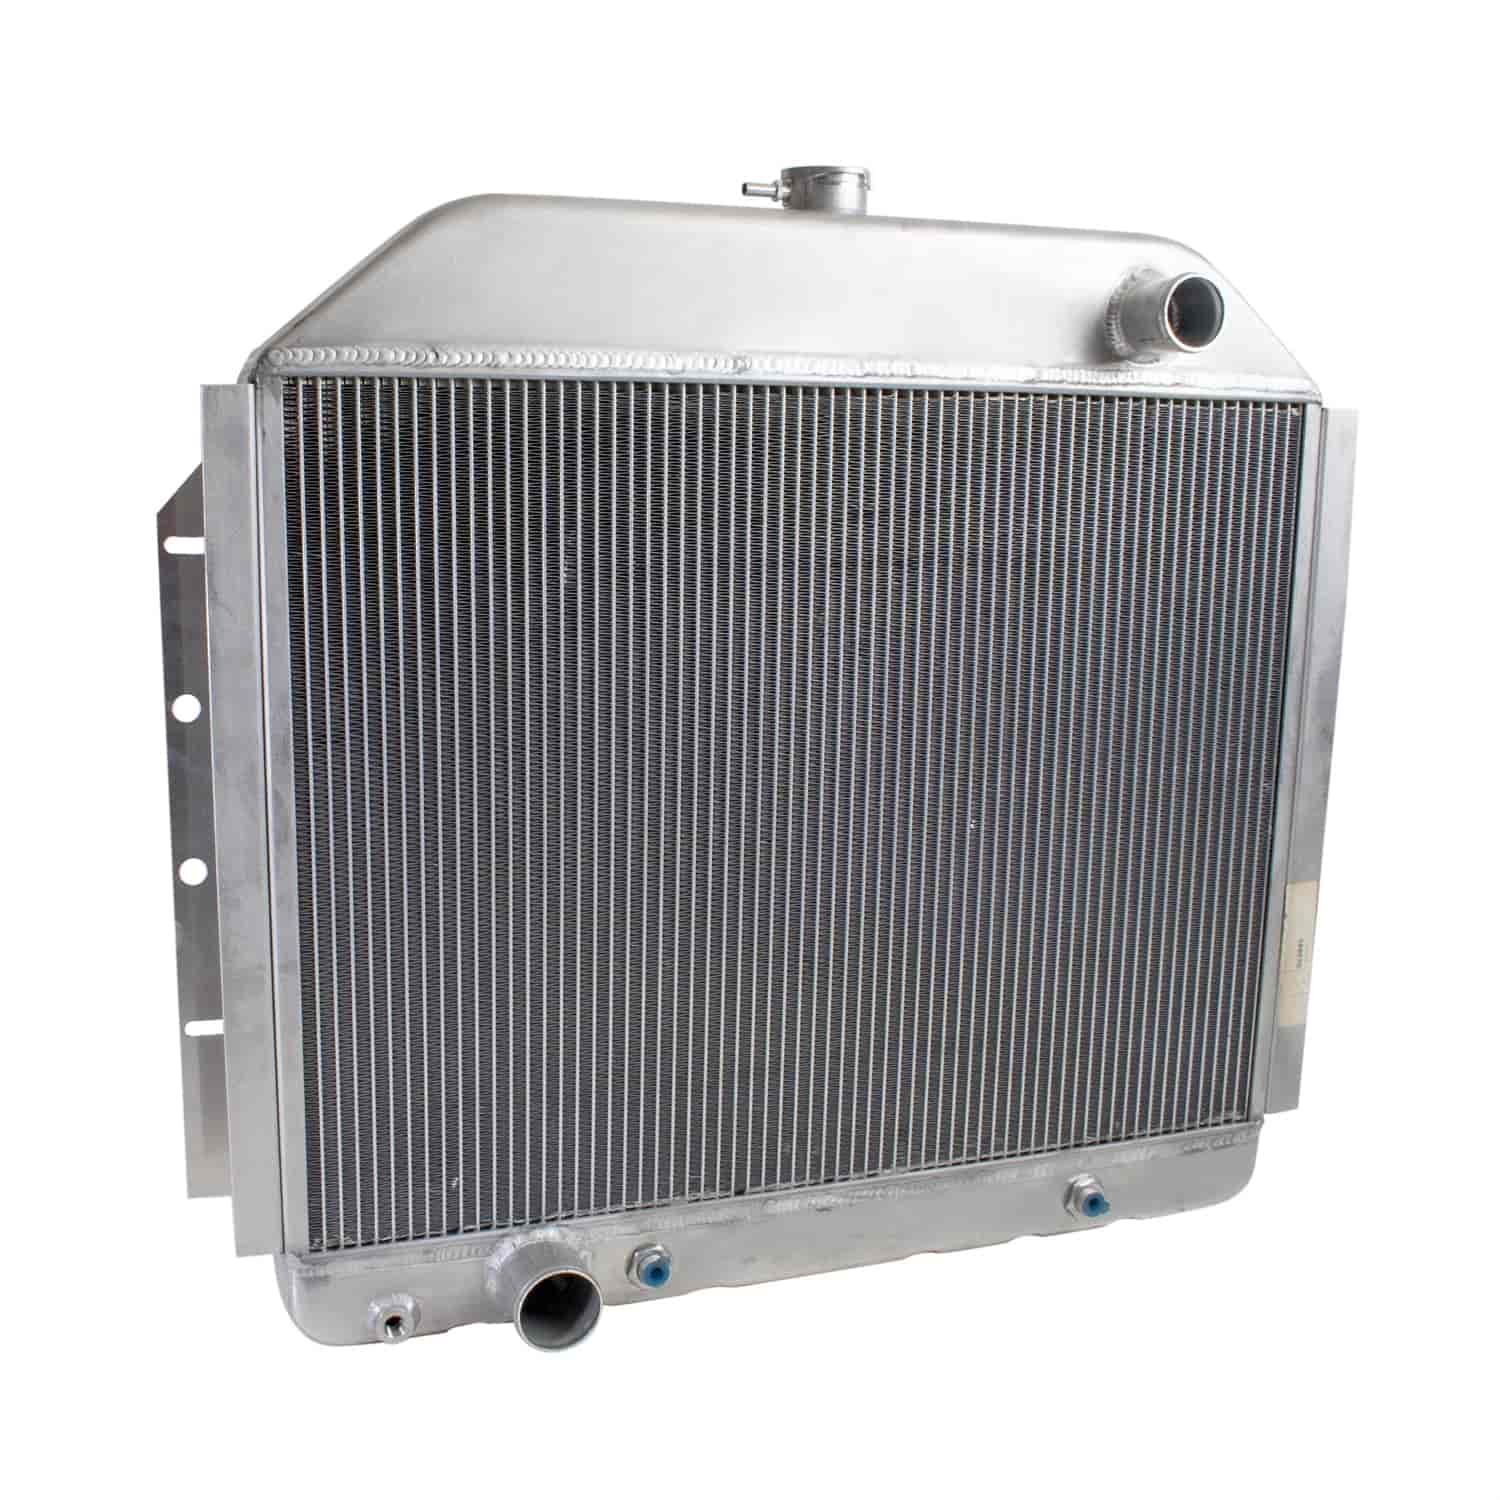 ExactFit Radiator for 1966-1977 Ford F-100, F-250, & 1978-1979 Bronco